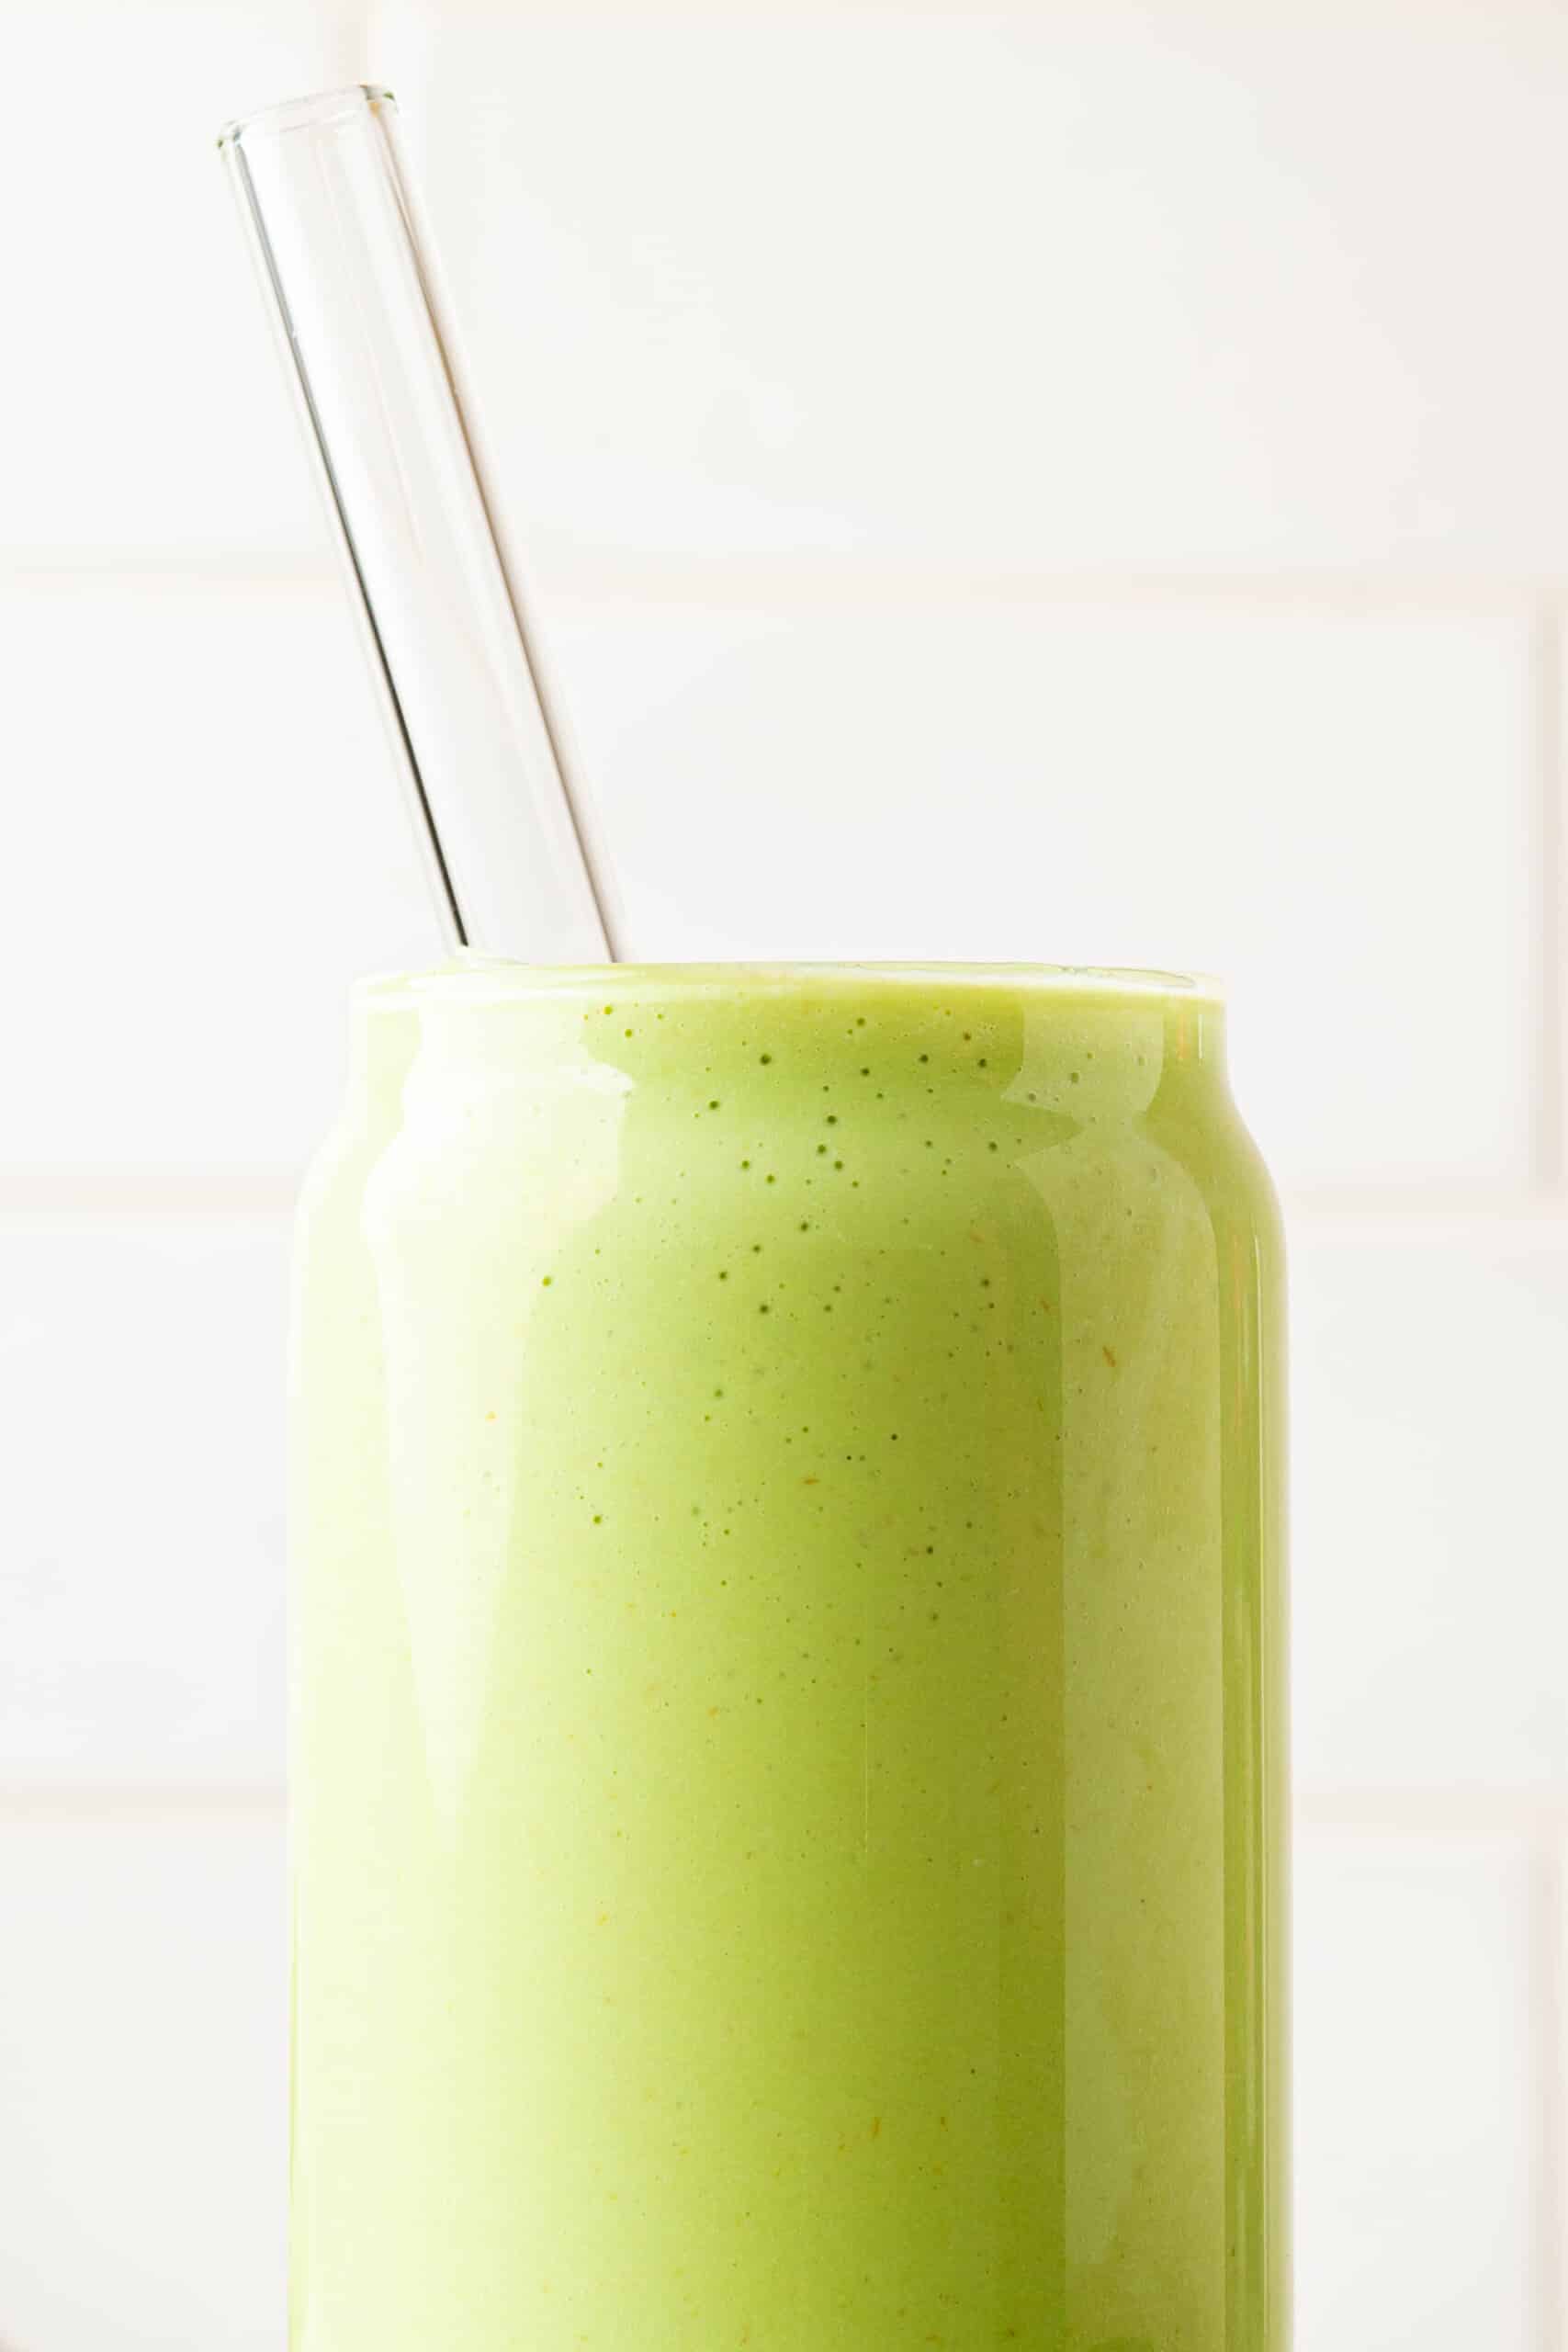 "Avocados in smoothies in a clear glass with a clear straw"